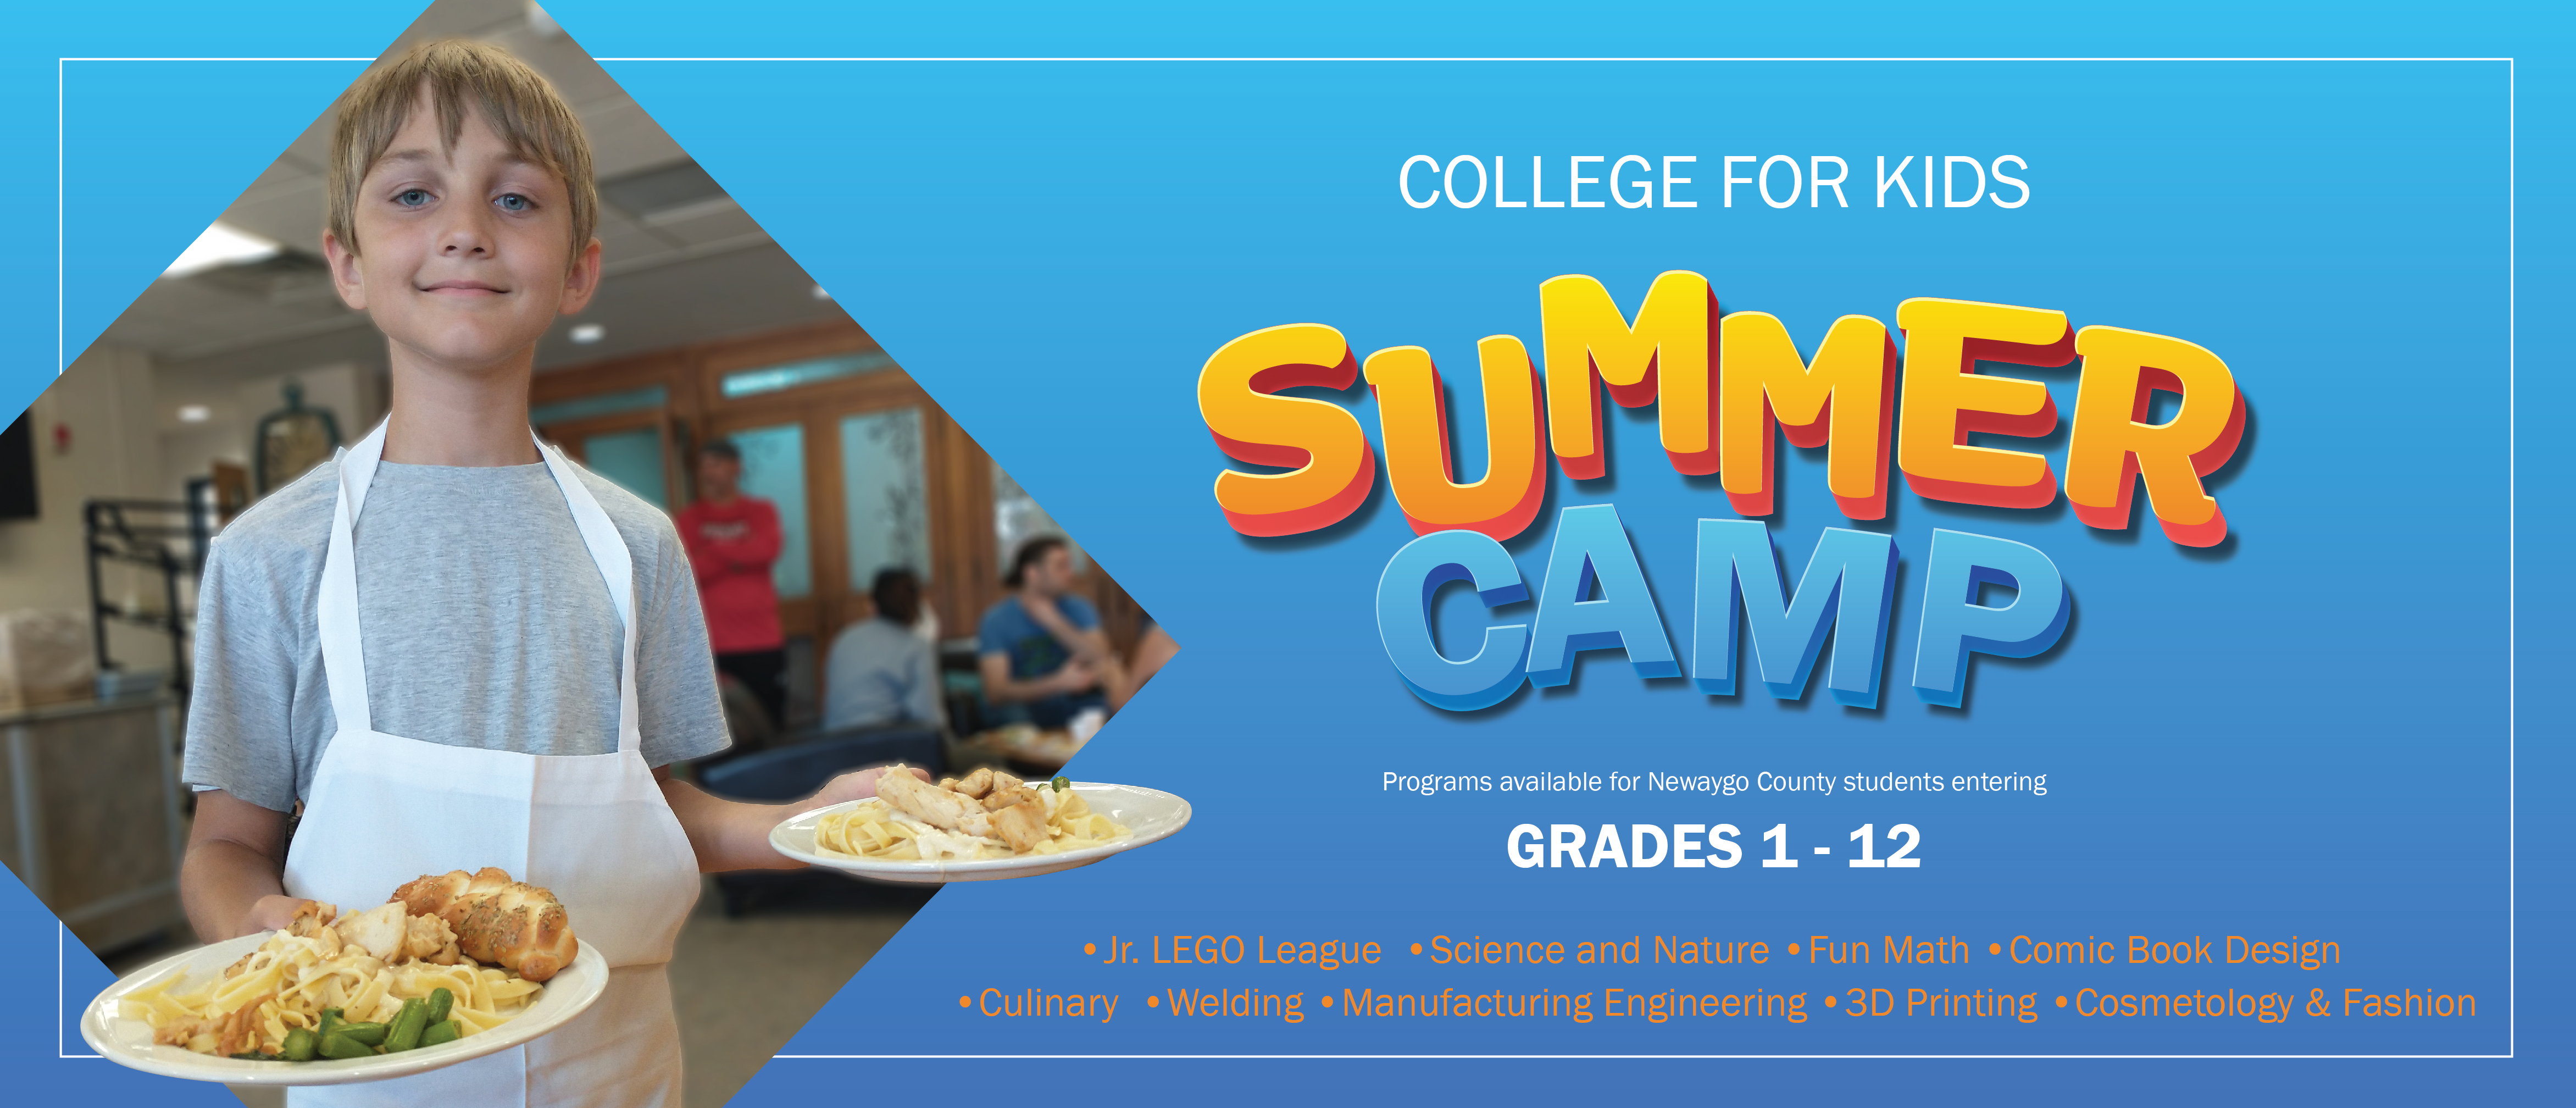 College for Kids, Summer Camp. Programs available for students entering grades 1 - 12. 